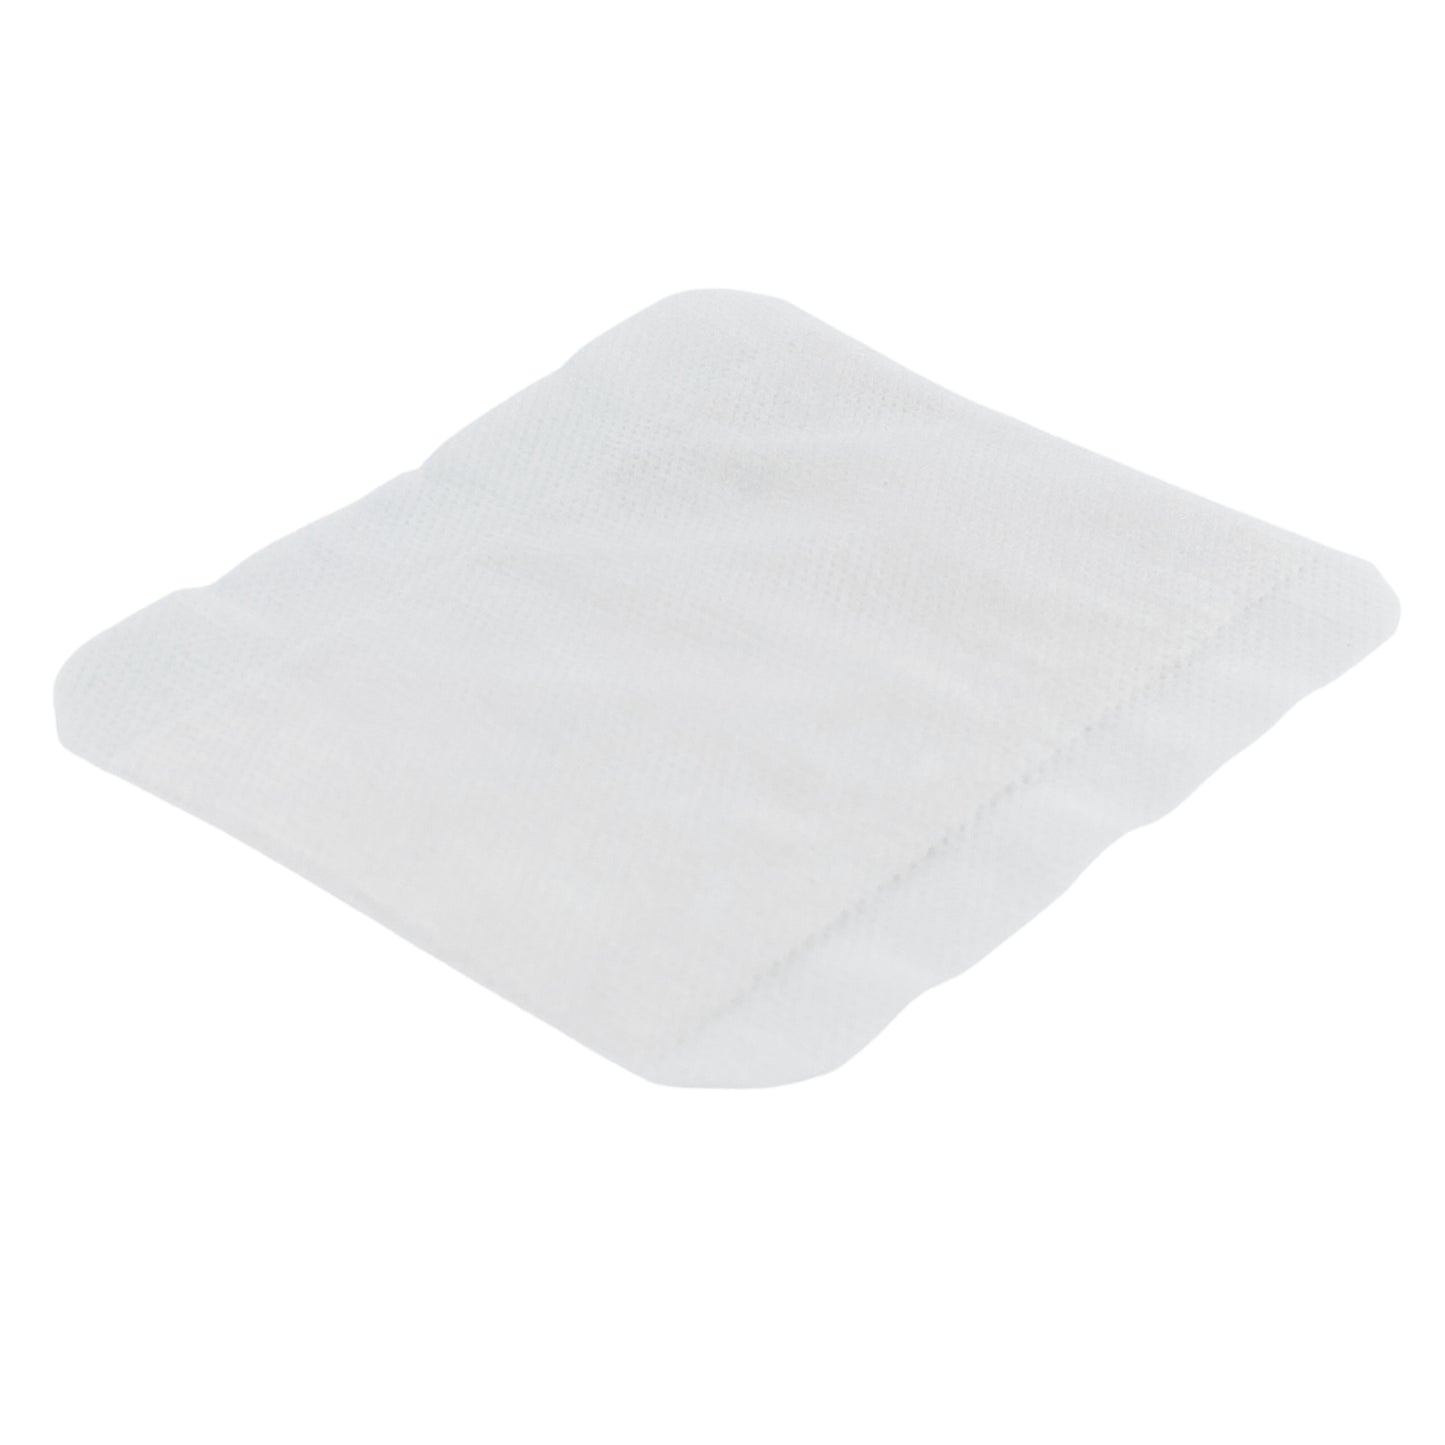 DryMax Extra Soft Absorbent Wound Dressing (1)